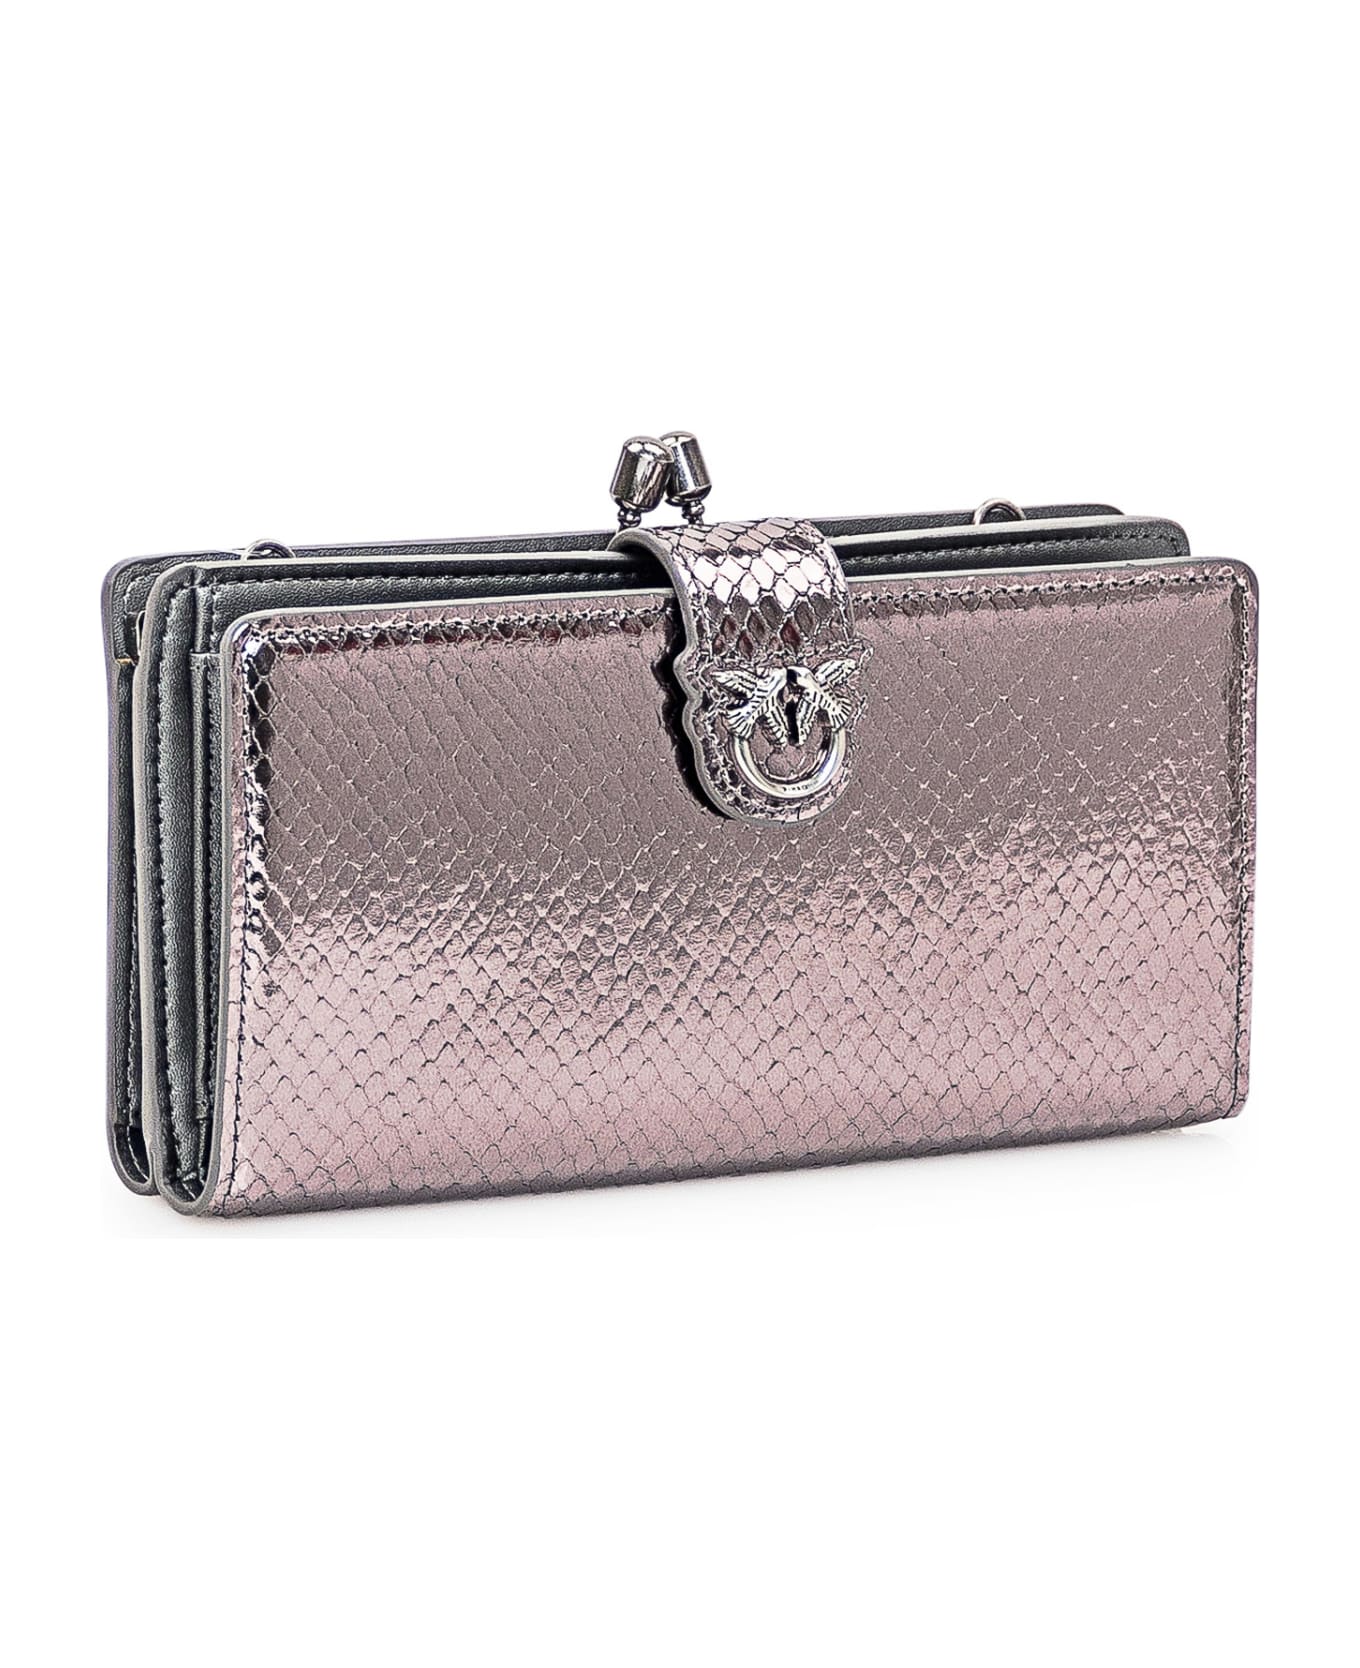 Pinko Wallet With Logo - ARGENTO SCURO-OLD SILVER 財布